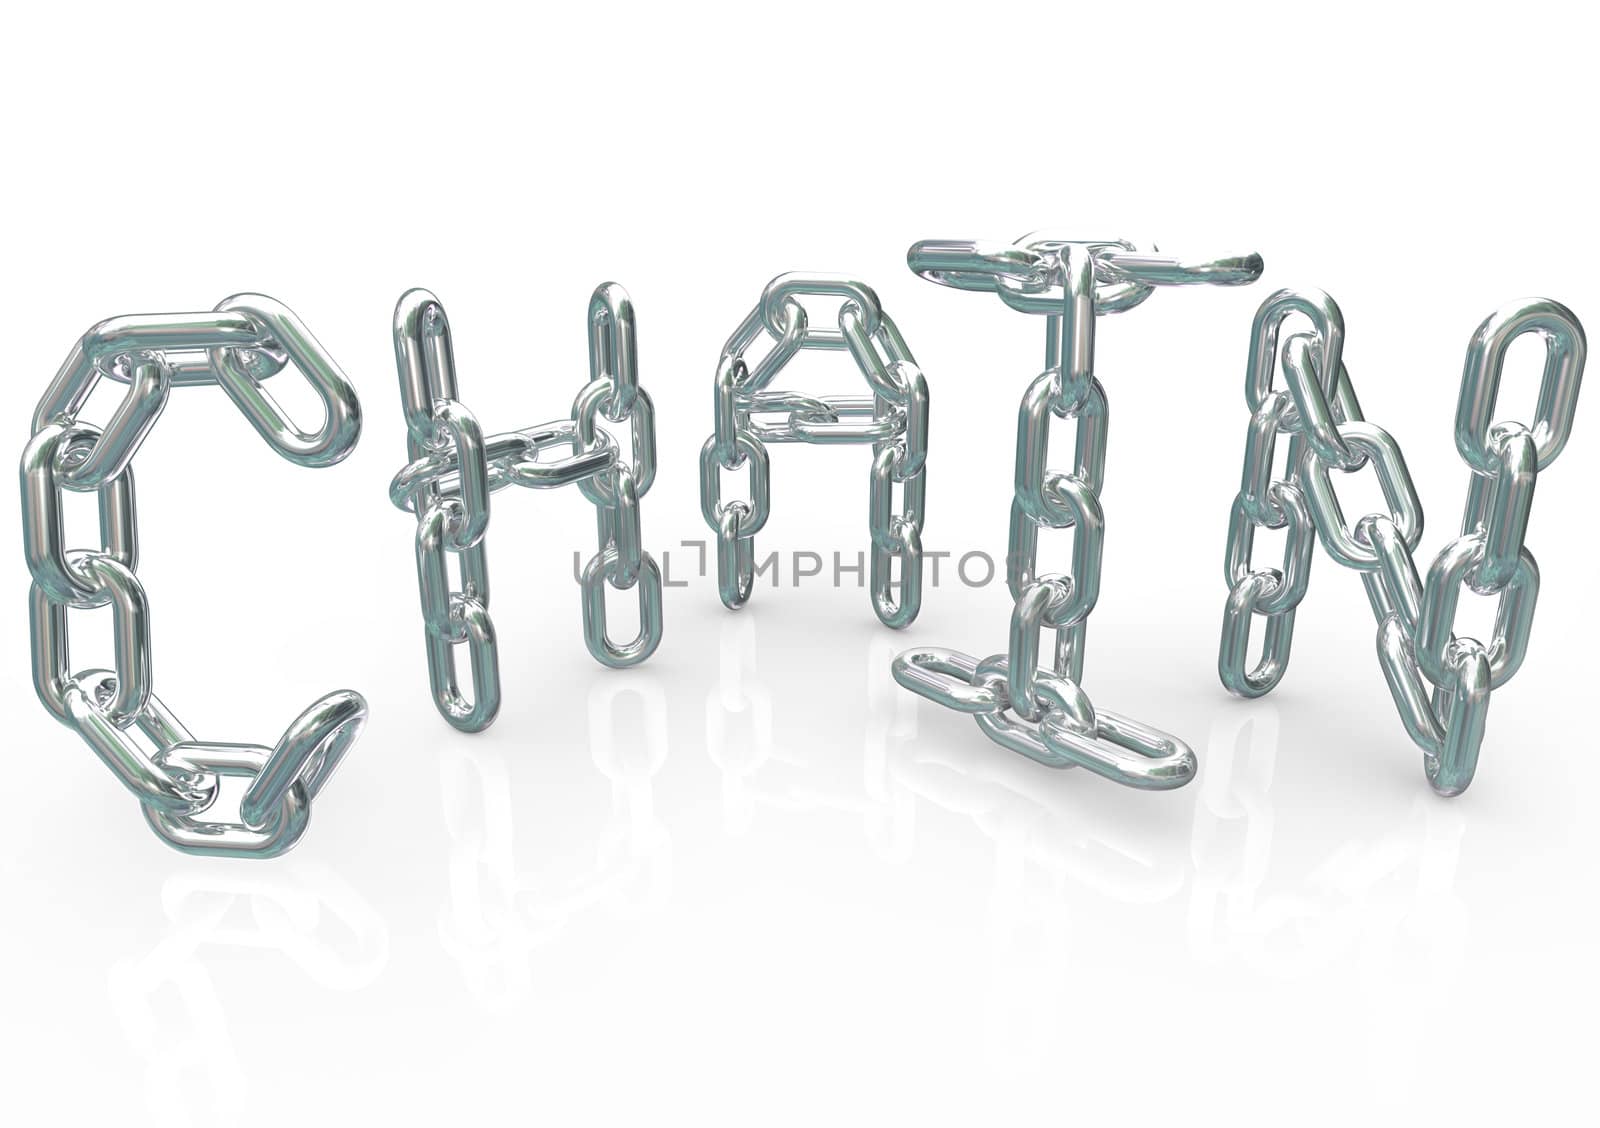 Many chains connected together and linked to form the word Chain, symbolizing unity, teamwork, organization, team processes, procedure and synergy